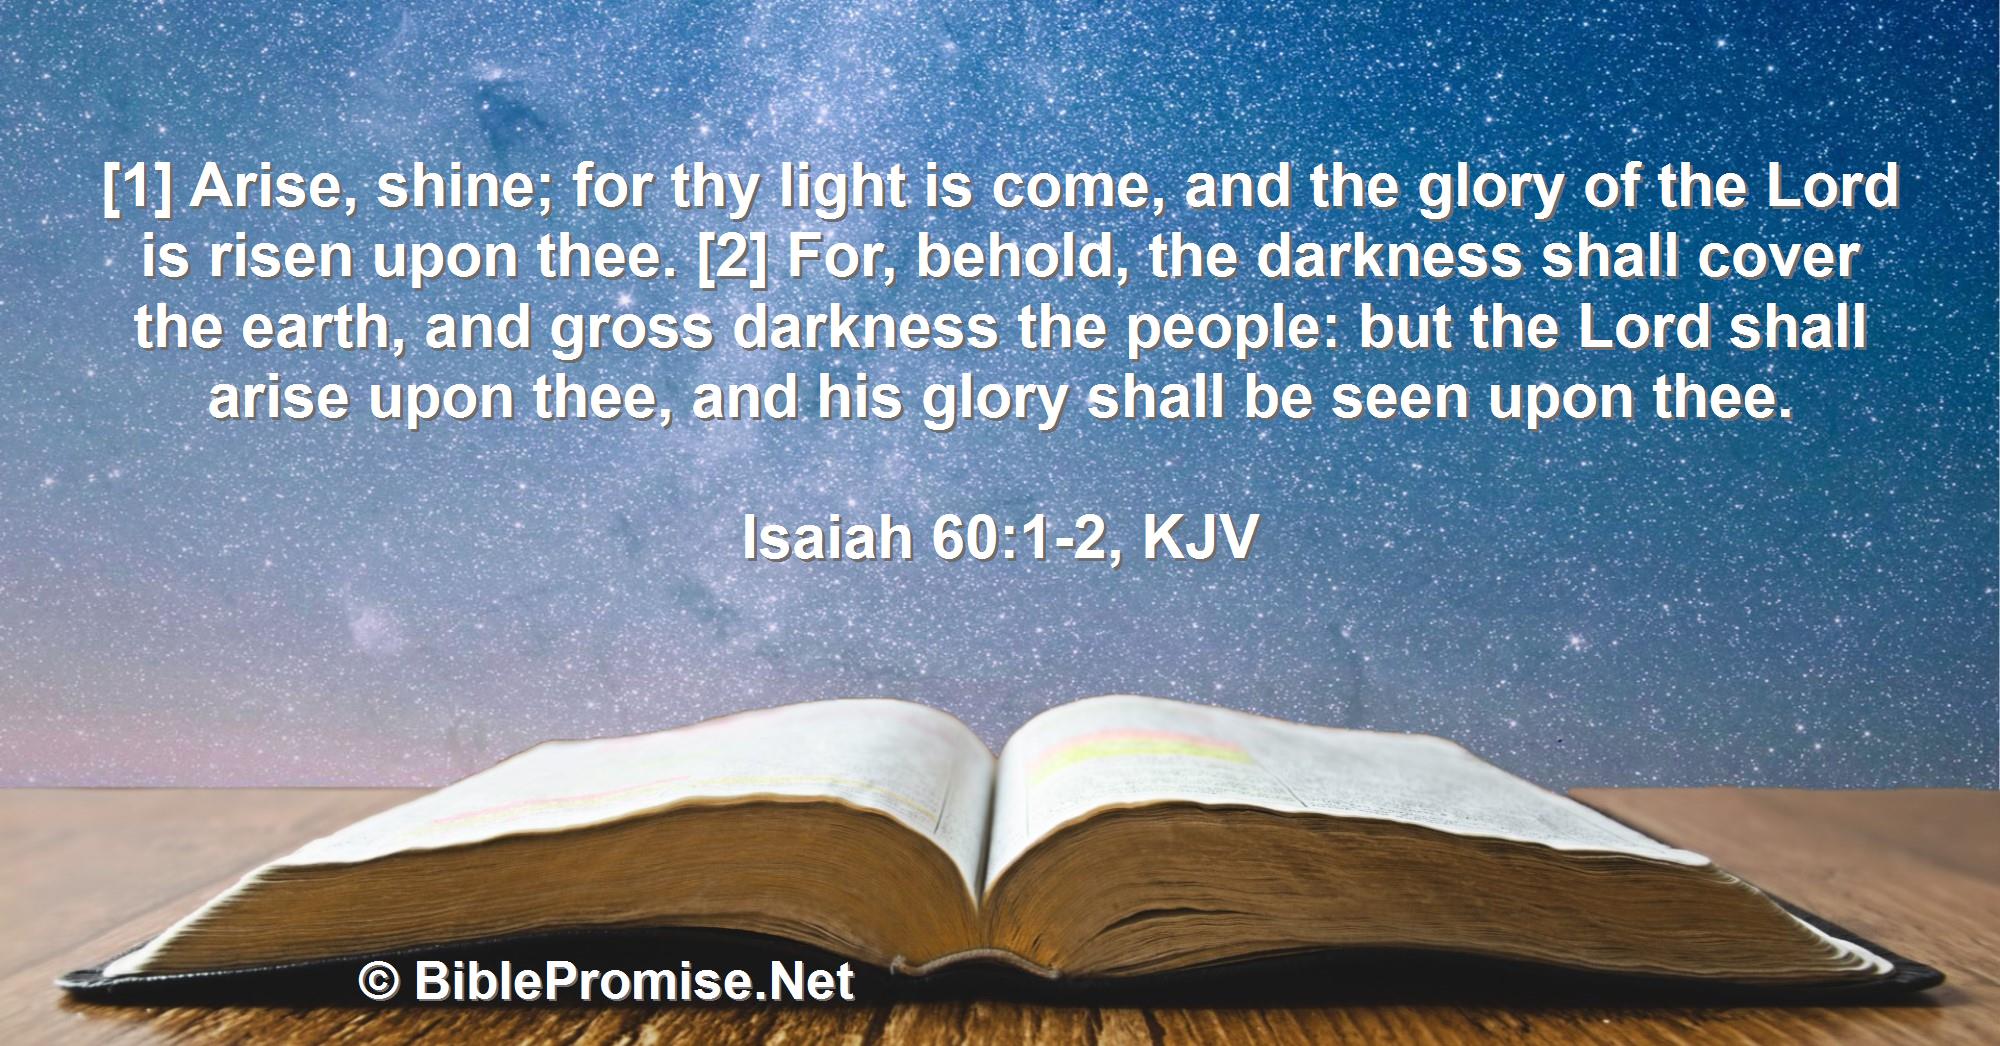 Saturday, May 27, 2023 - Isaiah 60:1-2 (KJV) - Bible promise that God will protect you from darkness.